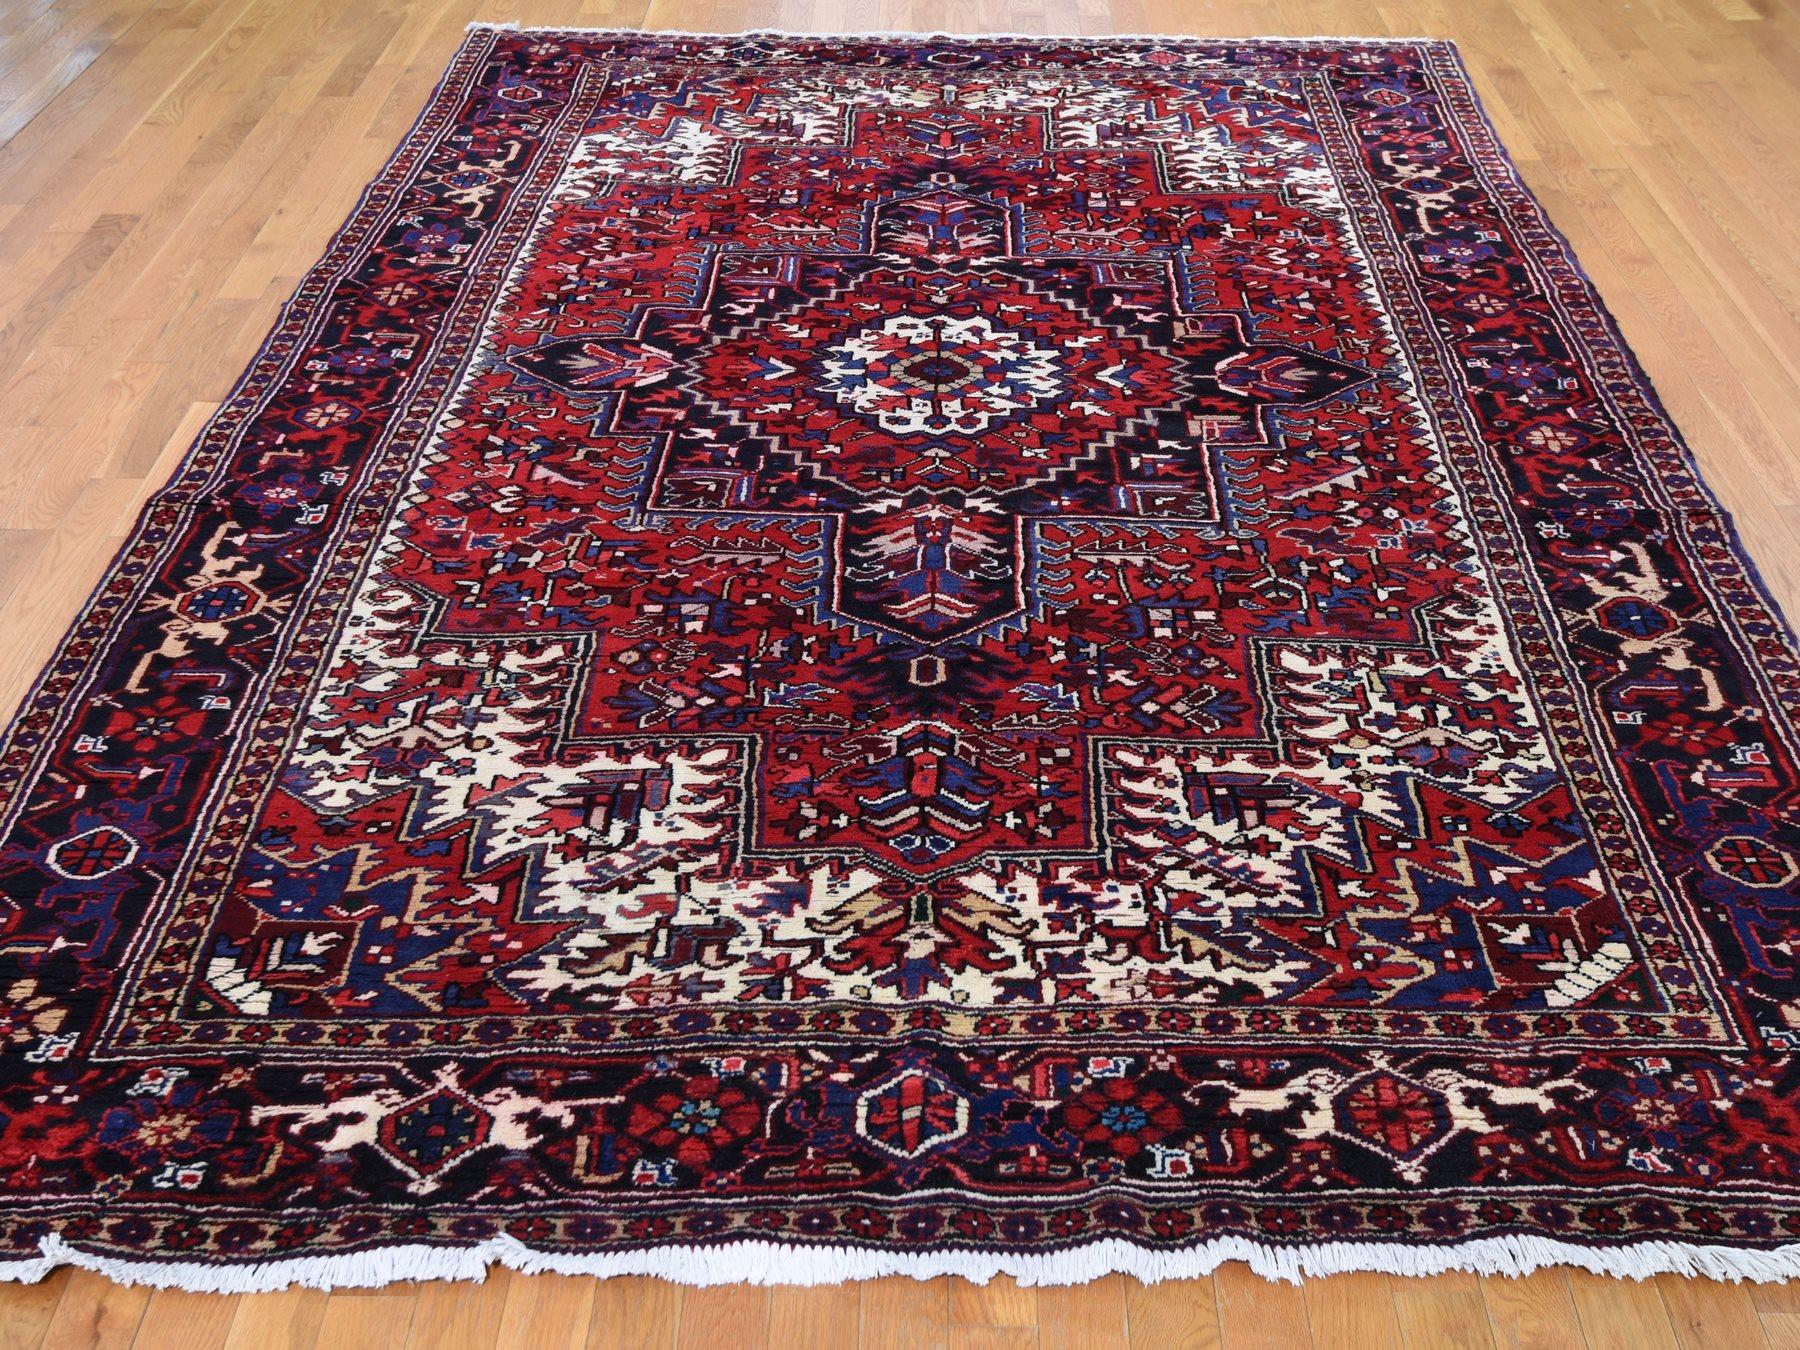 Hollywood Regency Red Semi Antique Persian Heriz Good Condition Hand Knotted Oriental Rug, 7'9